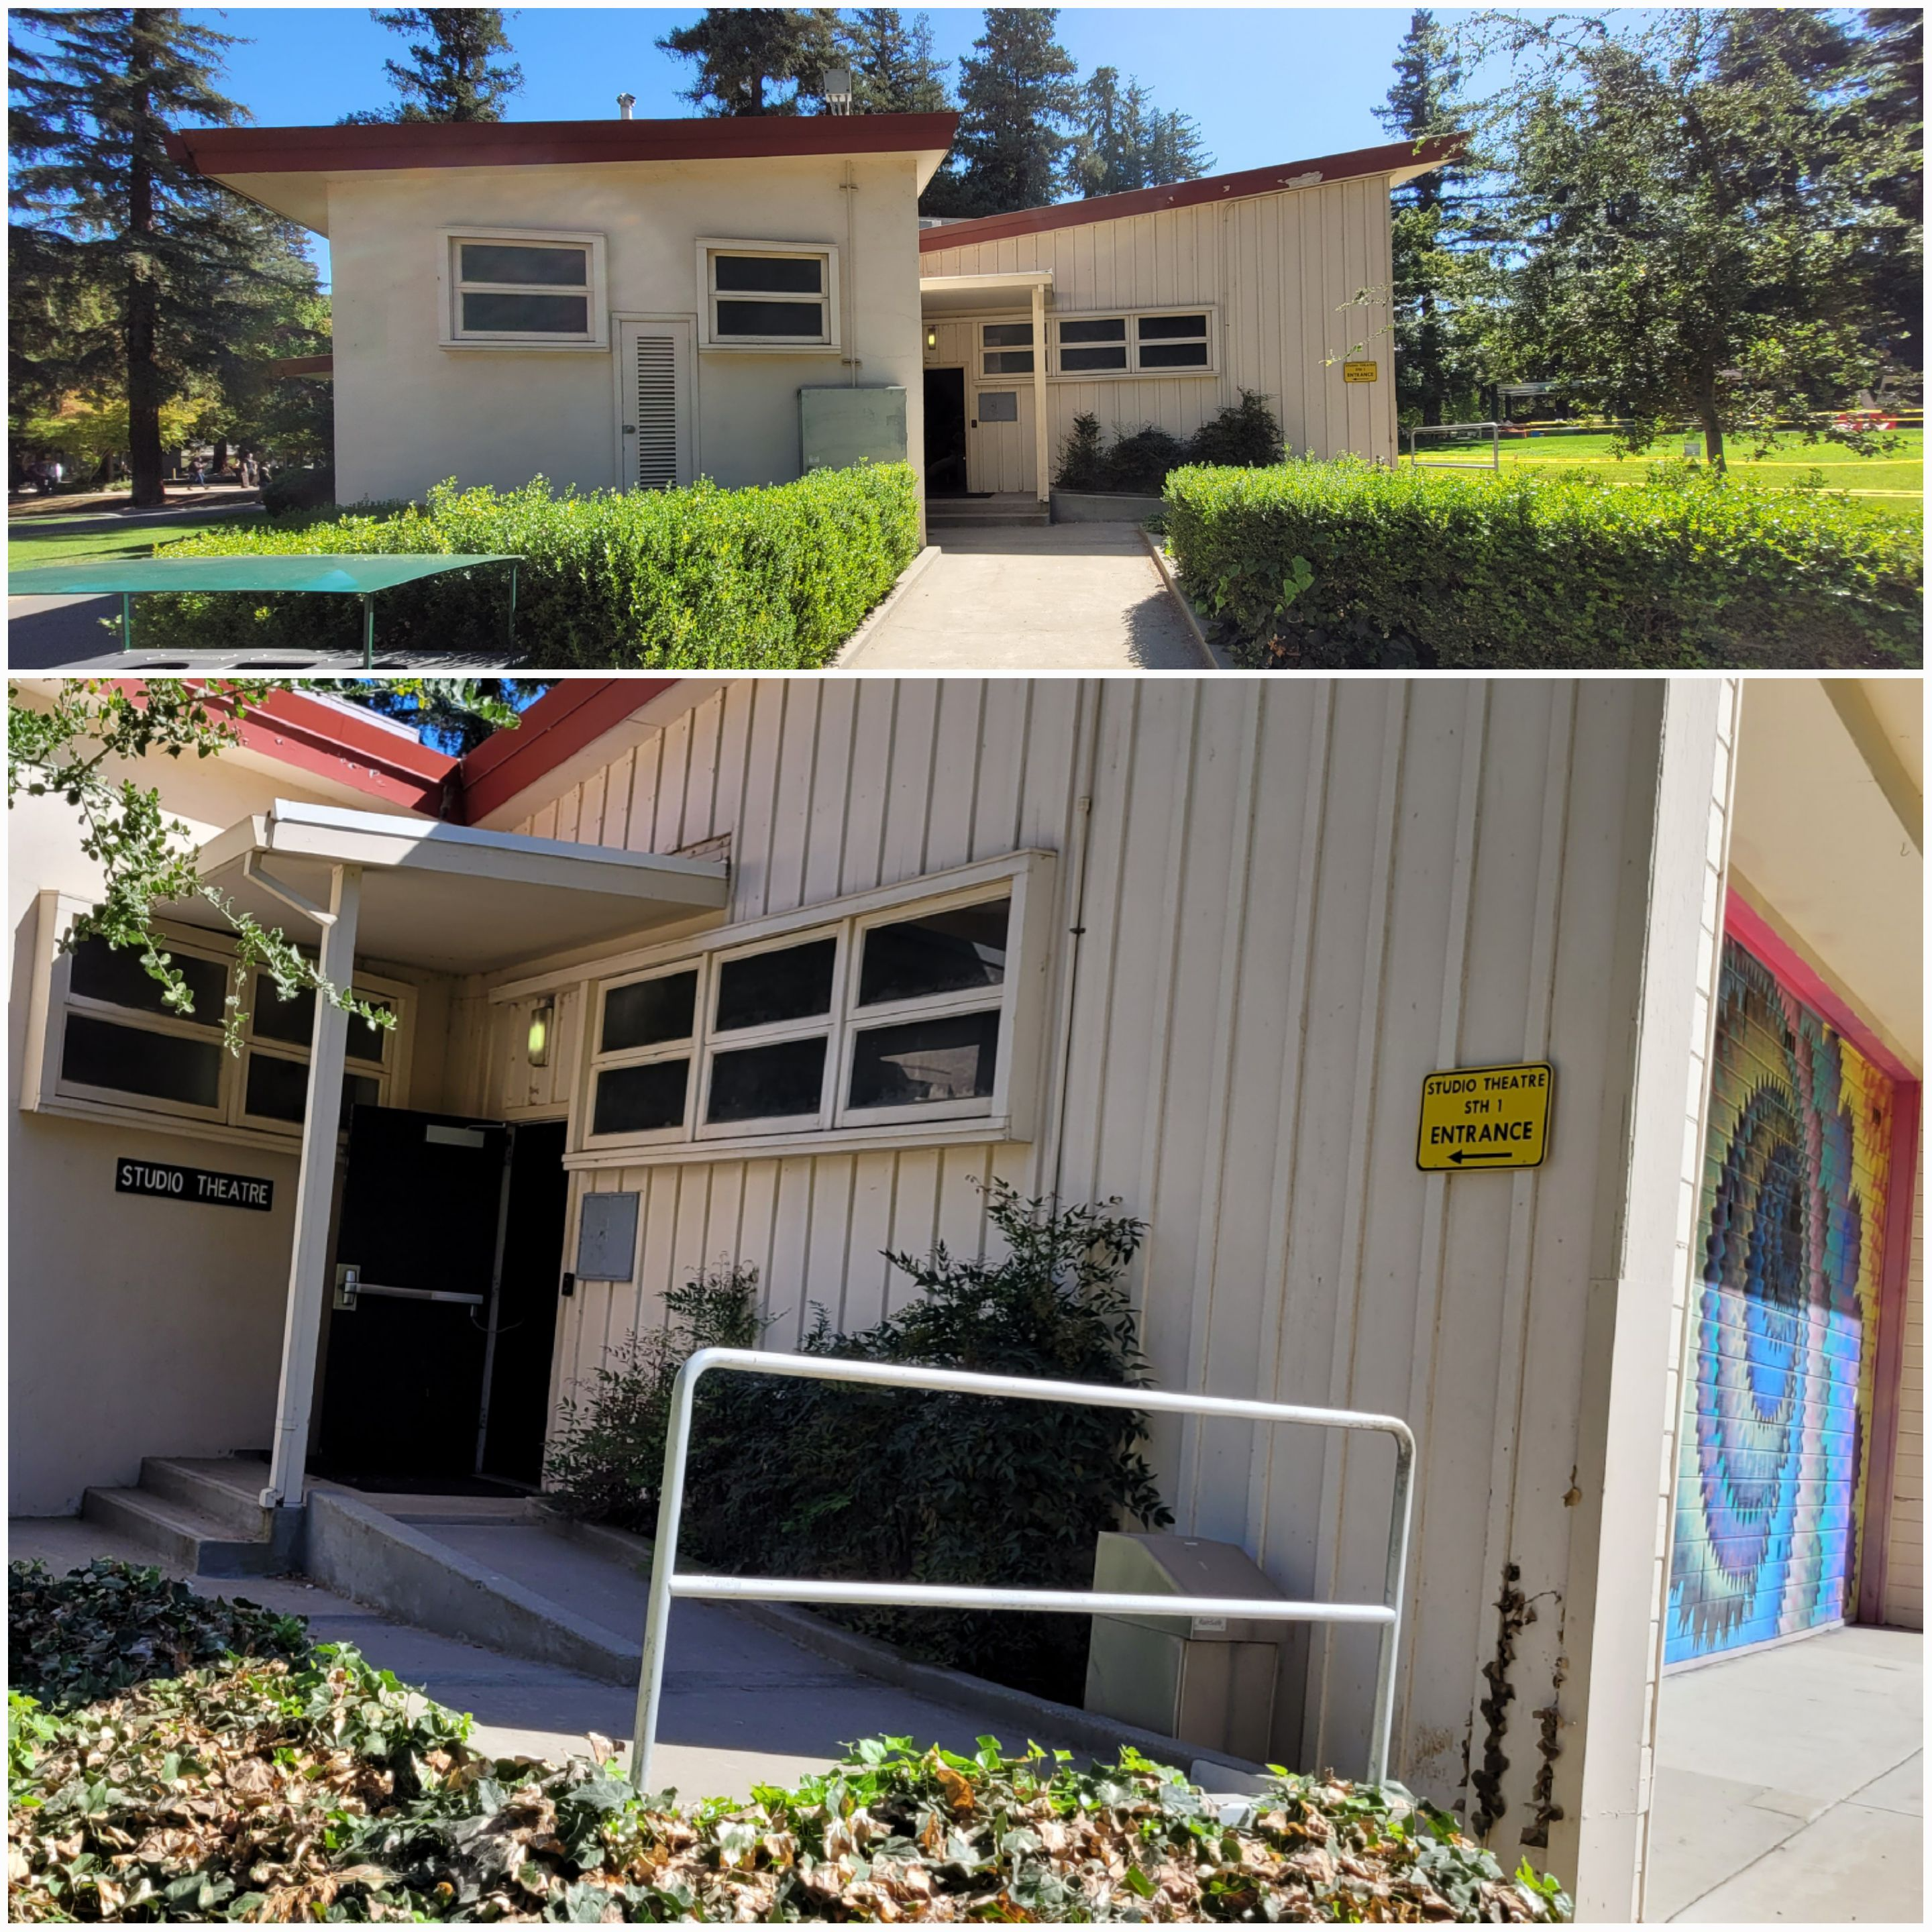 Pictured: The view from the walkway that connects to Capistrano (top) and an angled view from the South side of the building showing the entrance around the corner from the mural (bottom).